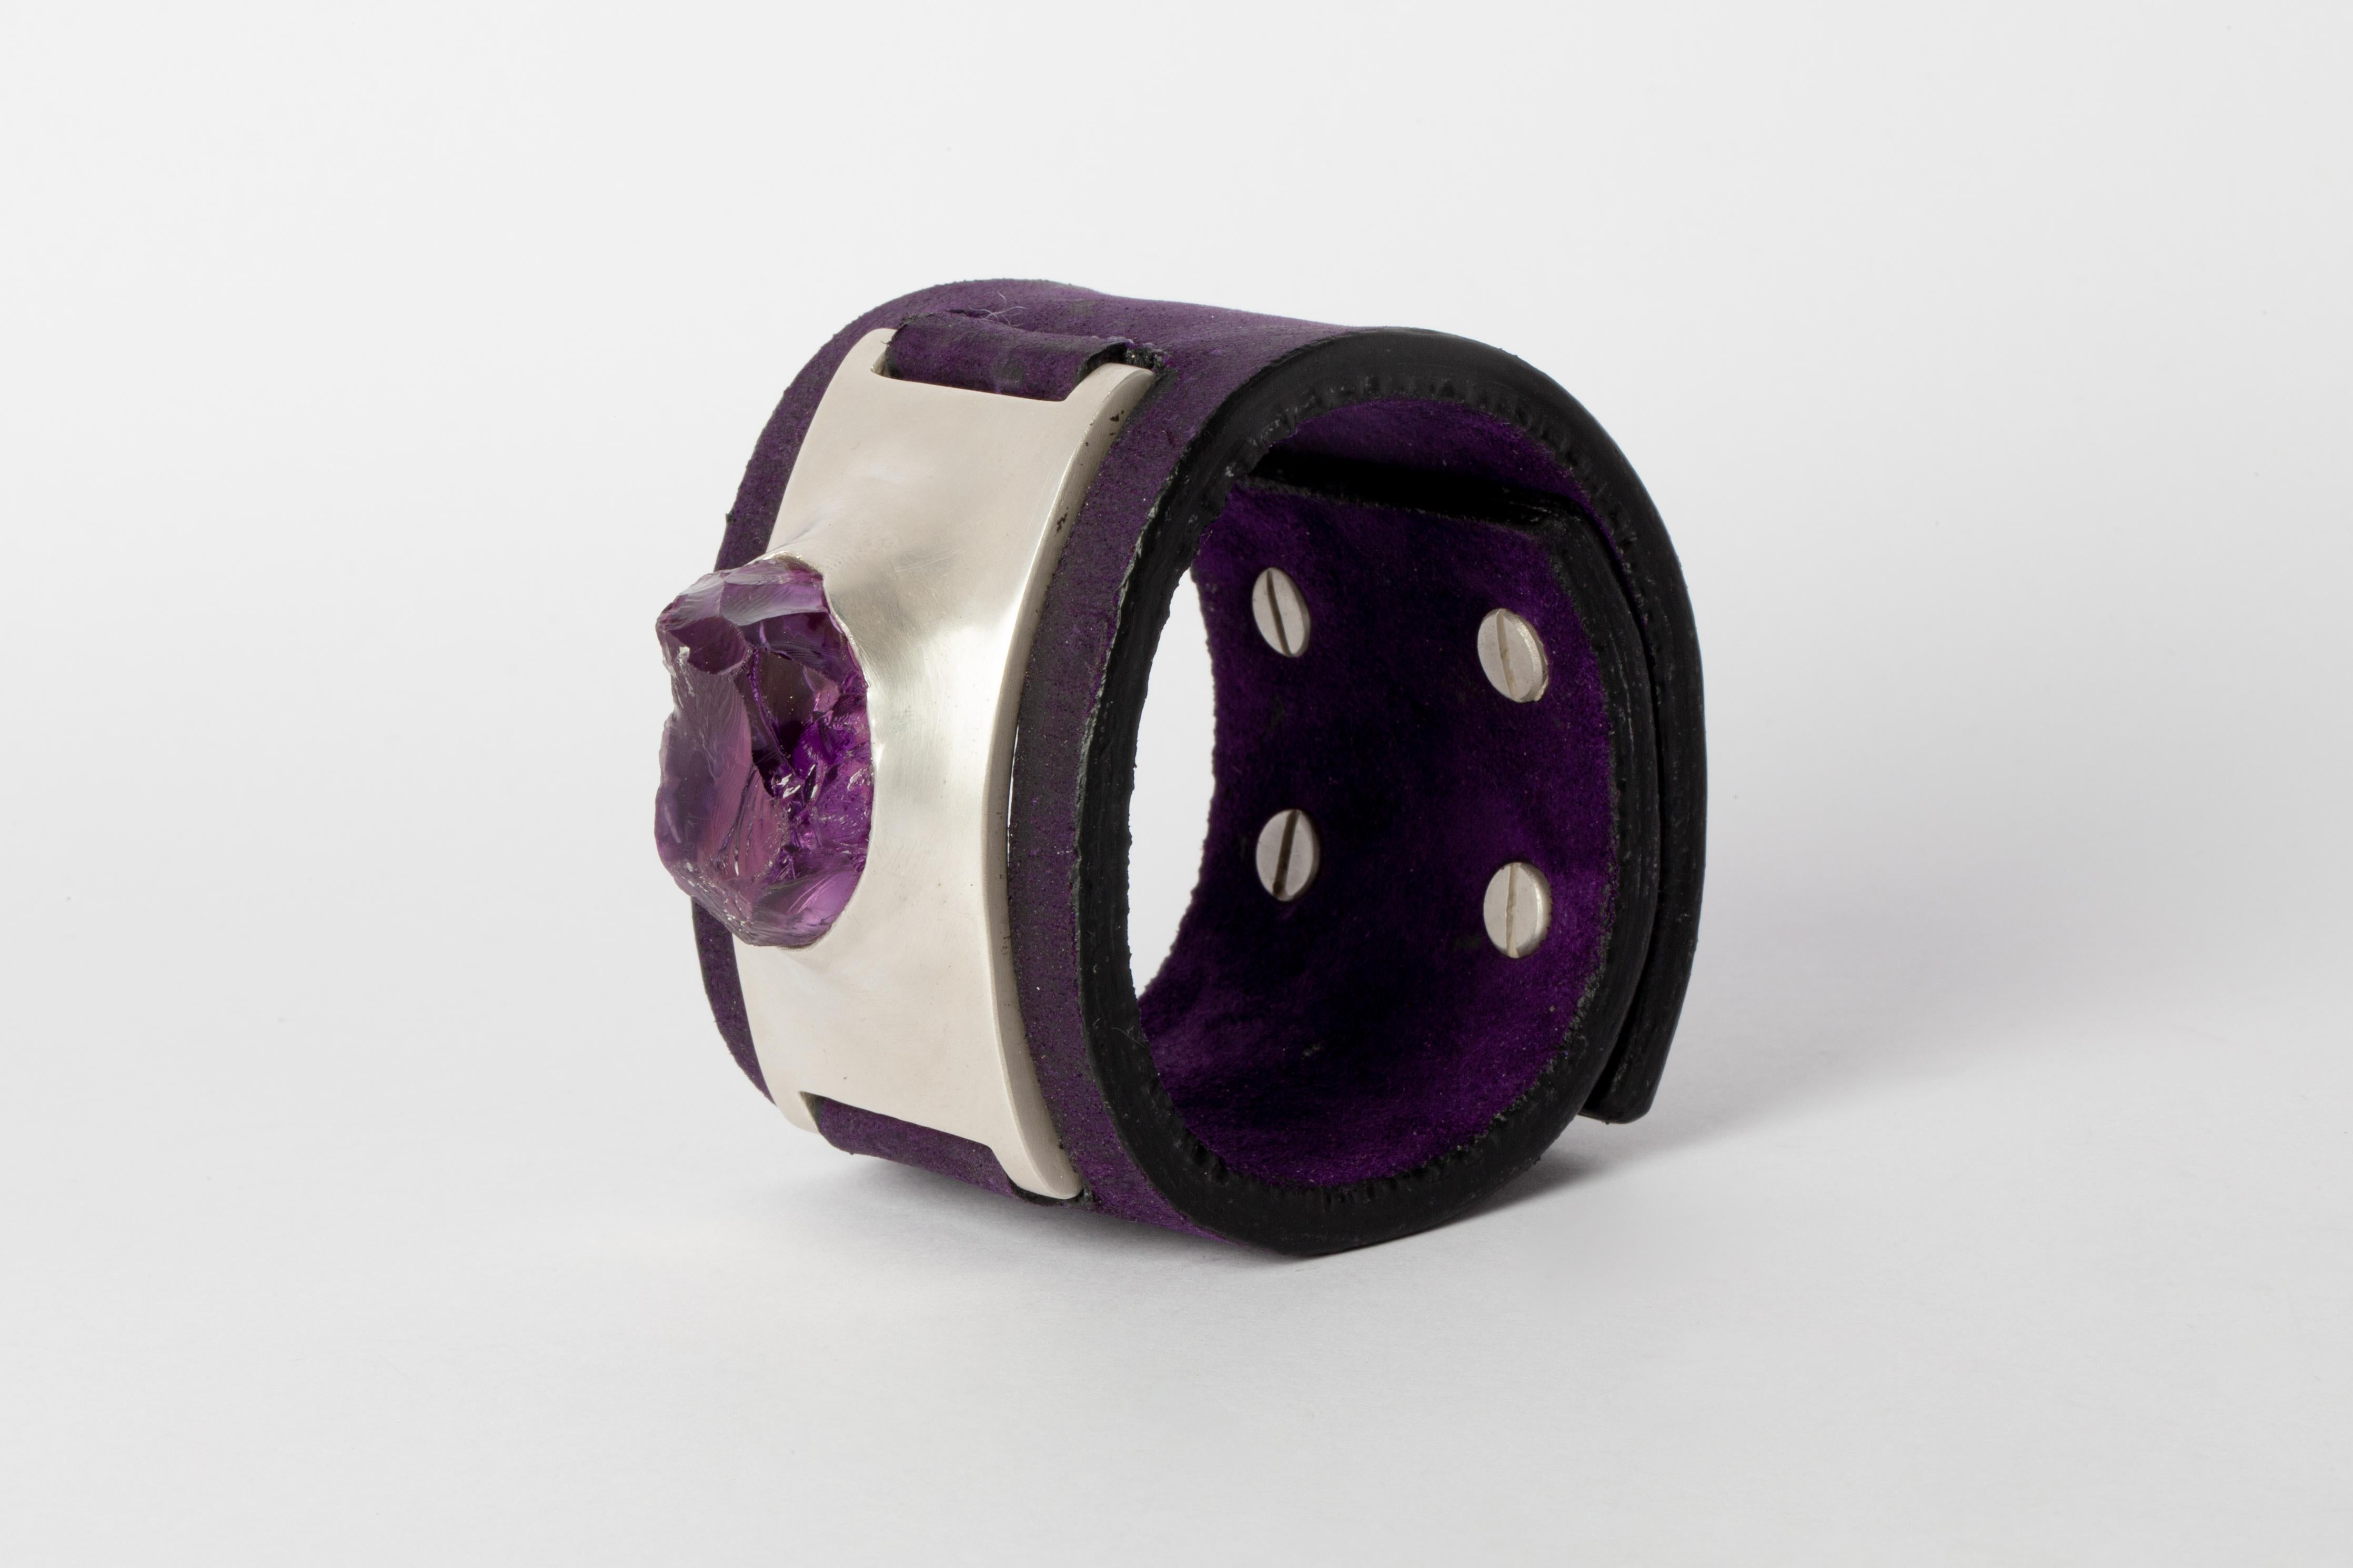 Bracelet in brass, amethyst, and purple anemone leather. Brass substrate is electroplated with silver and then dipped into acid to create the subtly destroyed surface. This item is made with a naturally occurring element and will vary from the